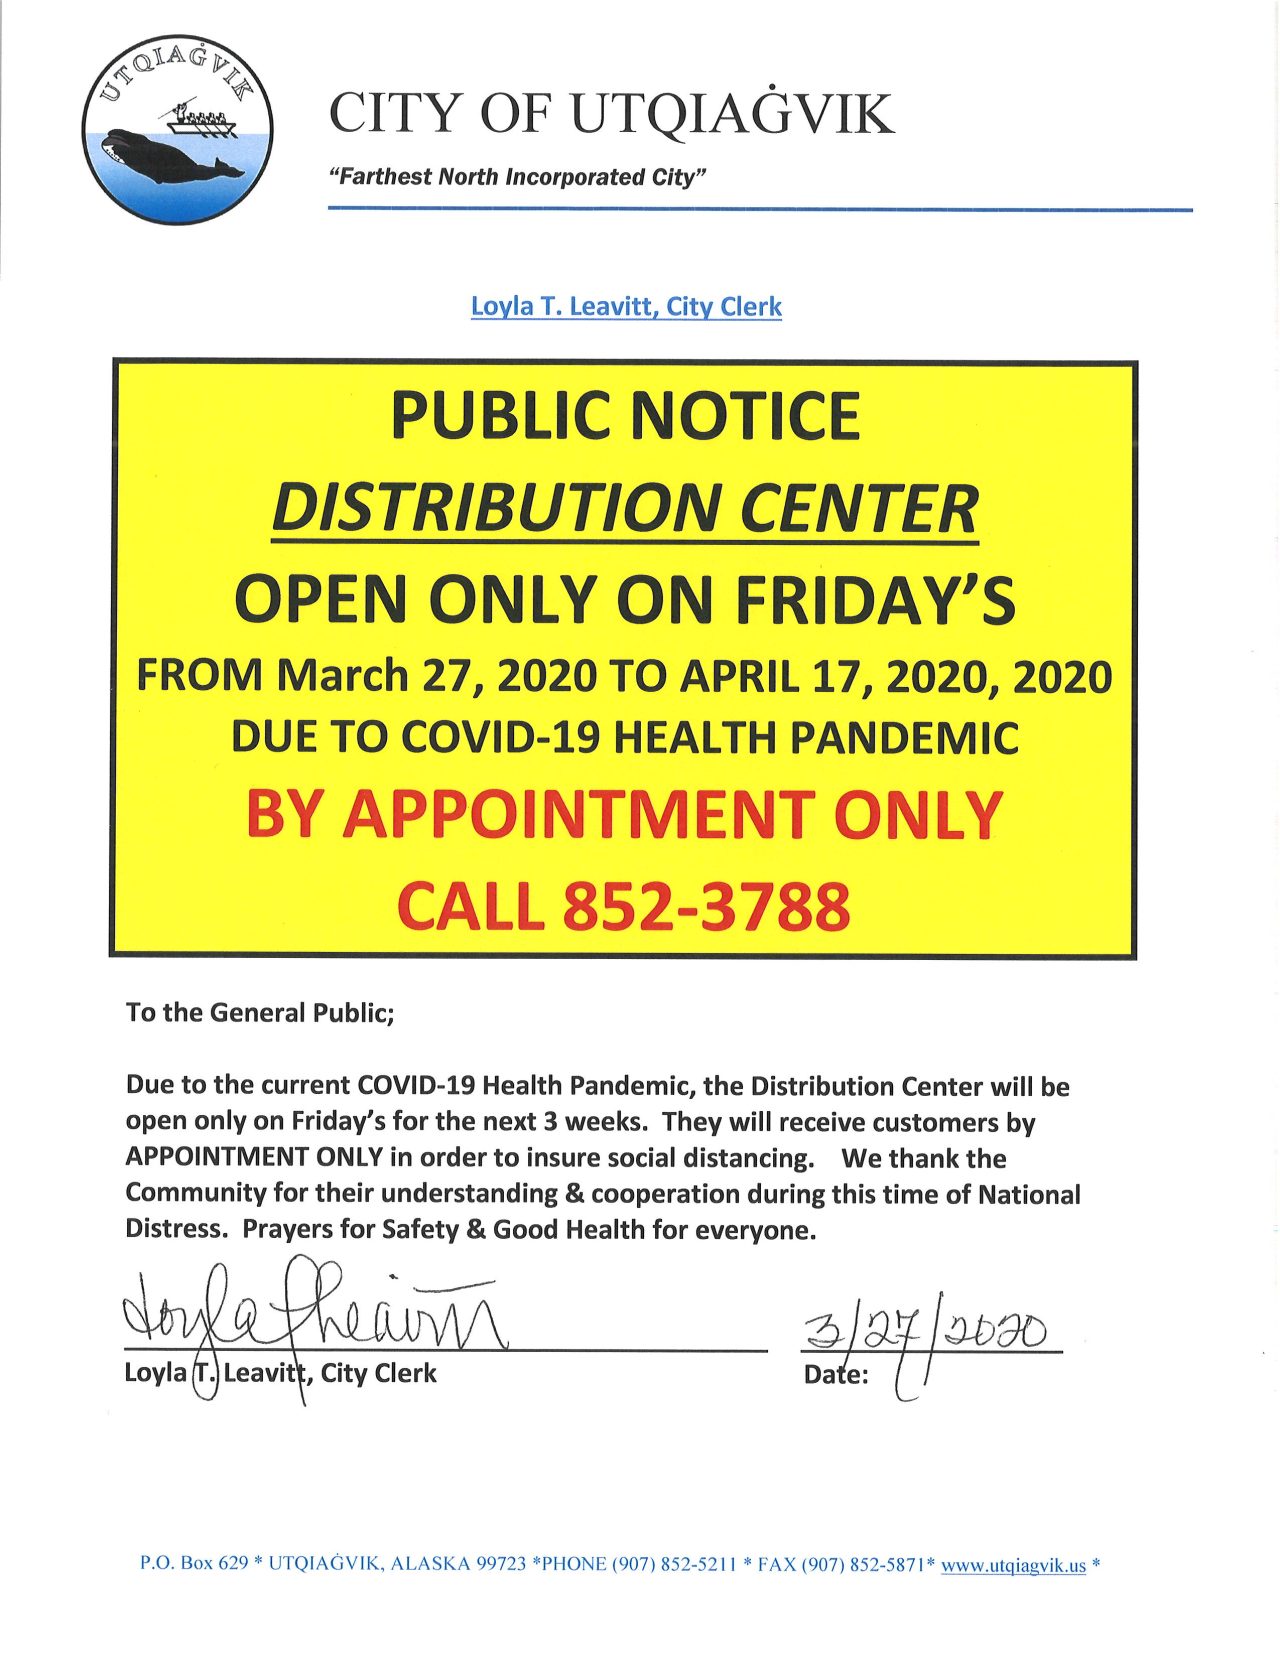 Distribution Center open only on Fridays – The City of Utqiagvik